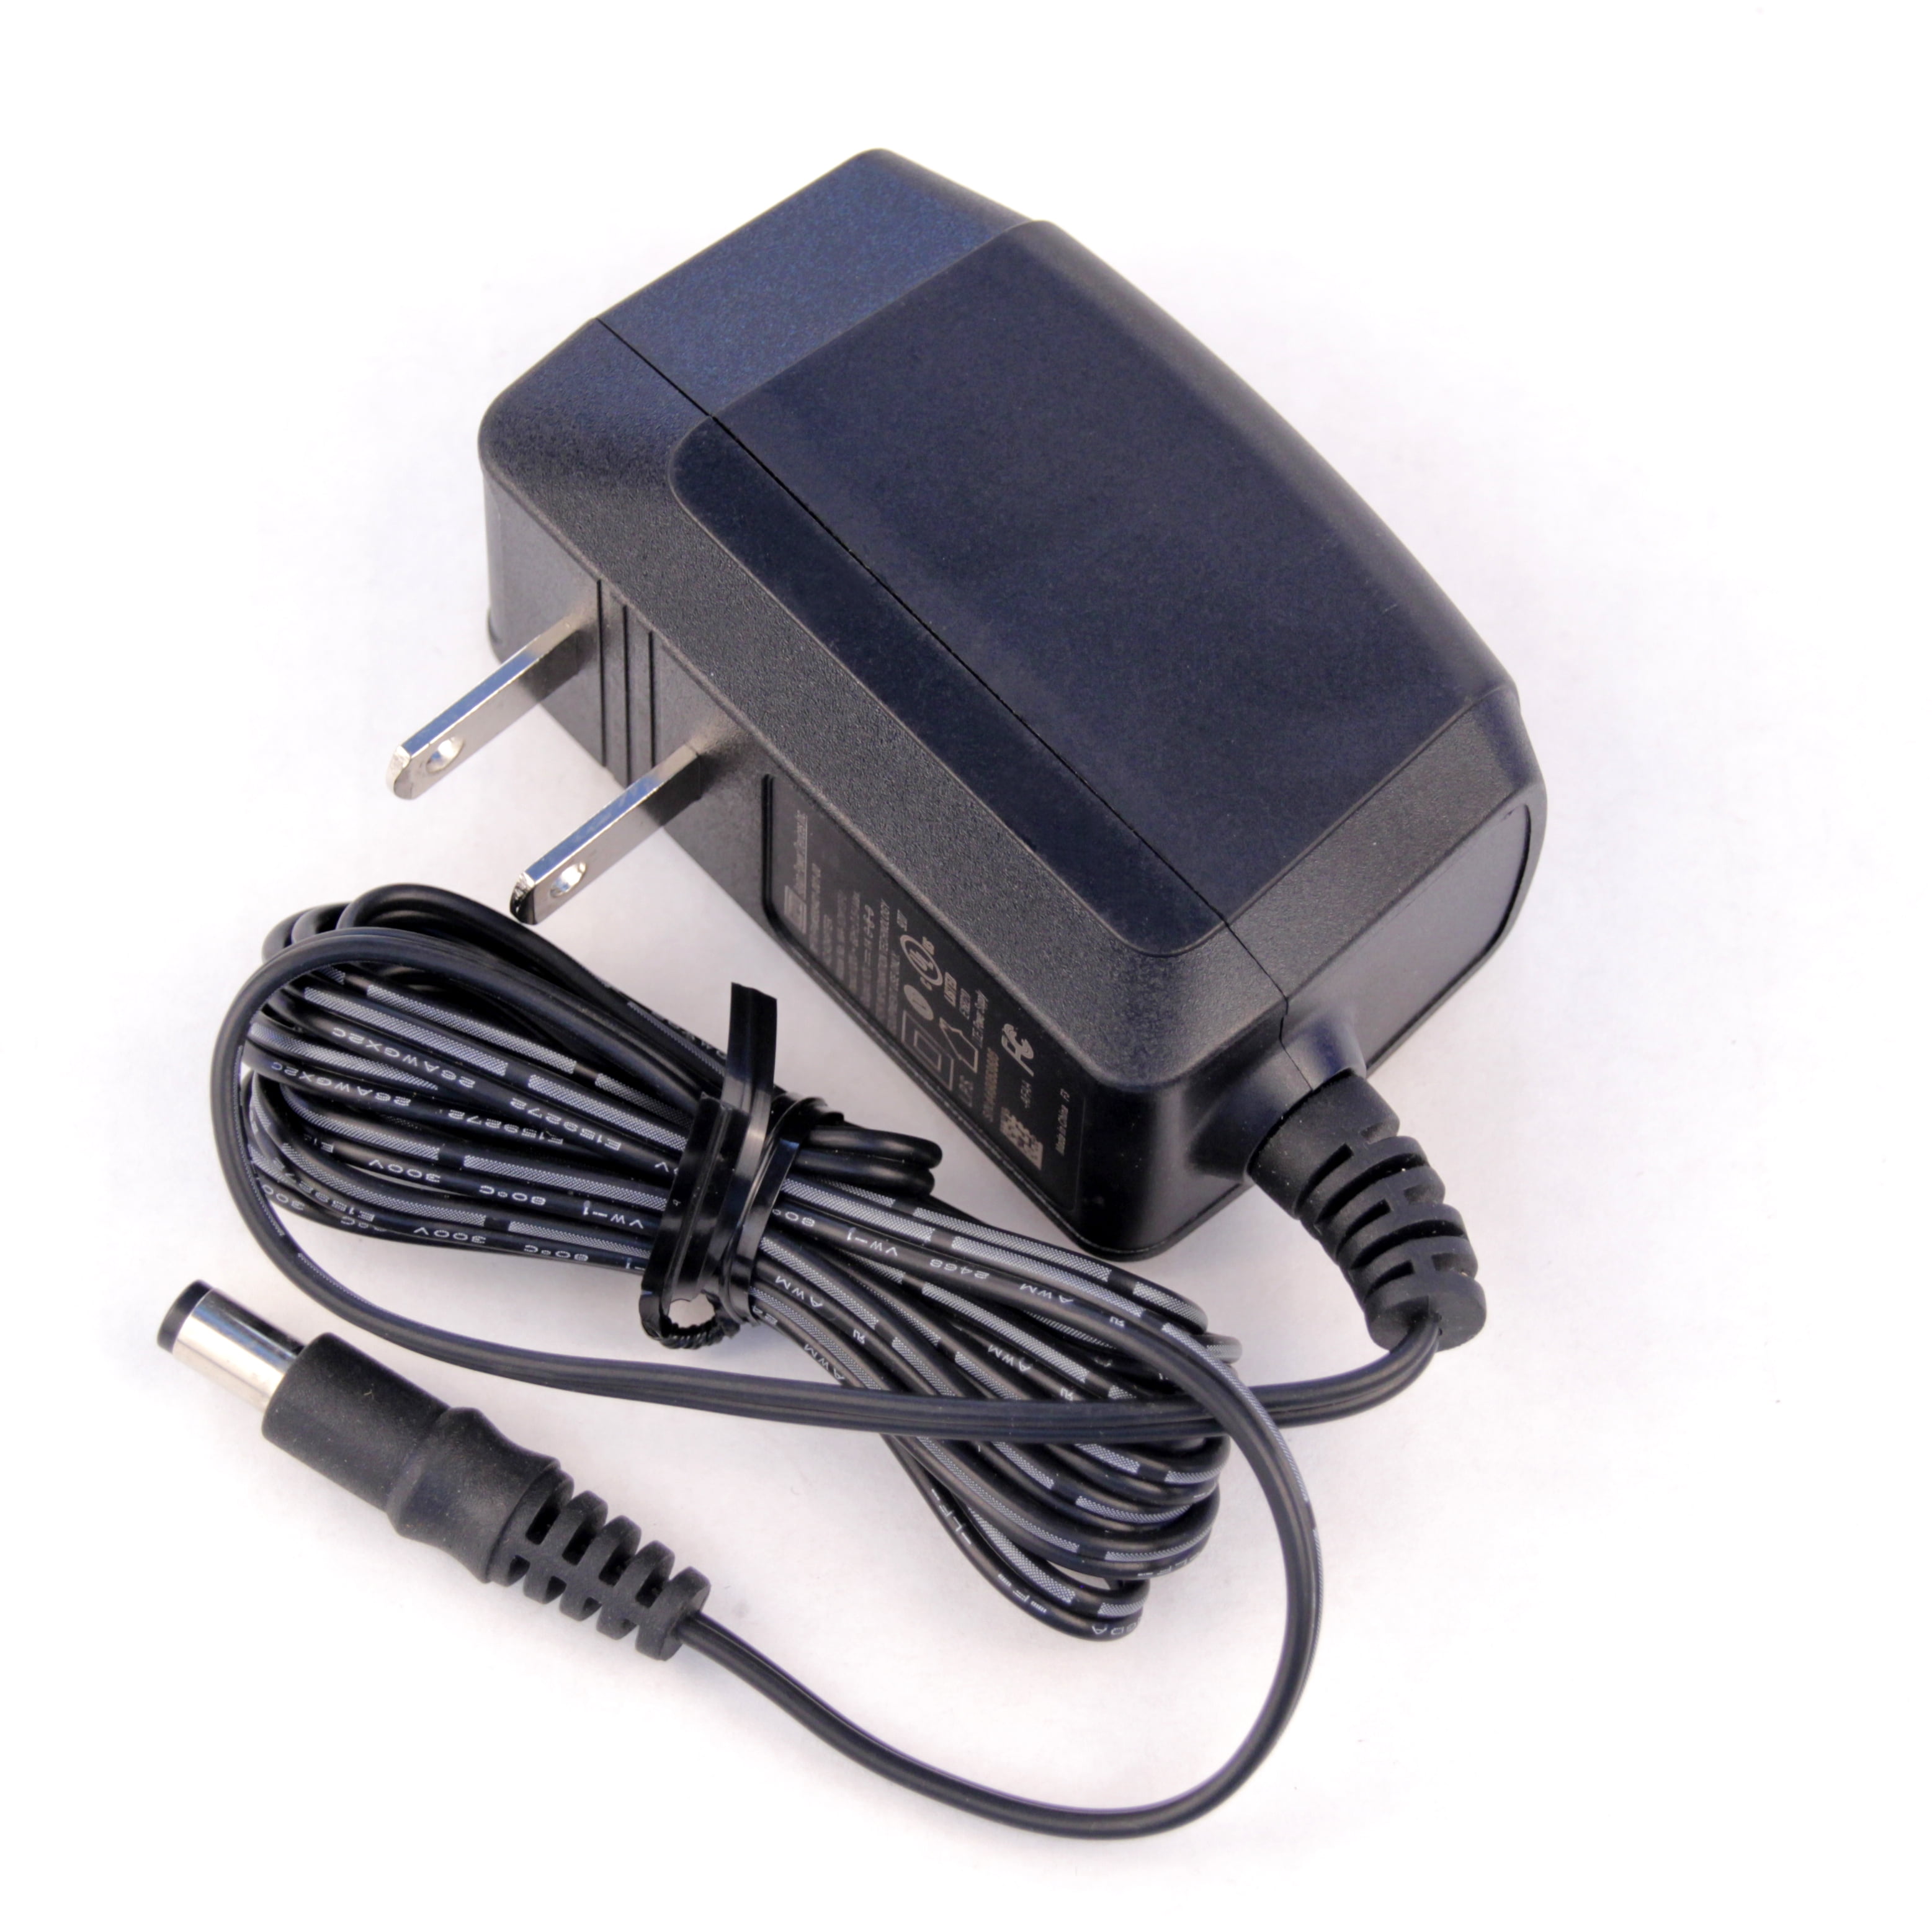 ECA-12W-12 ElectronicsComp 12V 1A 12W DC Power Supply Adapter (High Quality  Made in India Adapter with 1 Year Warranty) buy online at Low Price in  India 